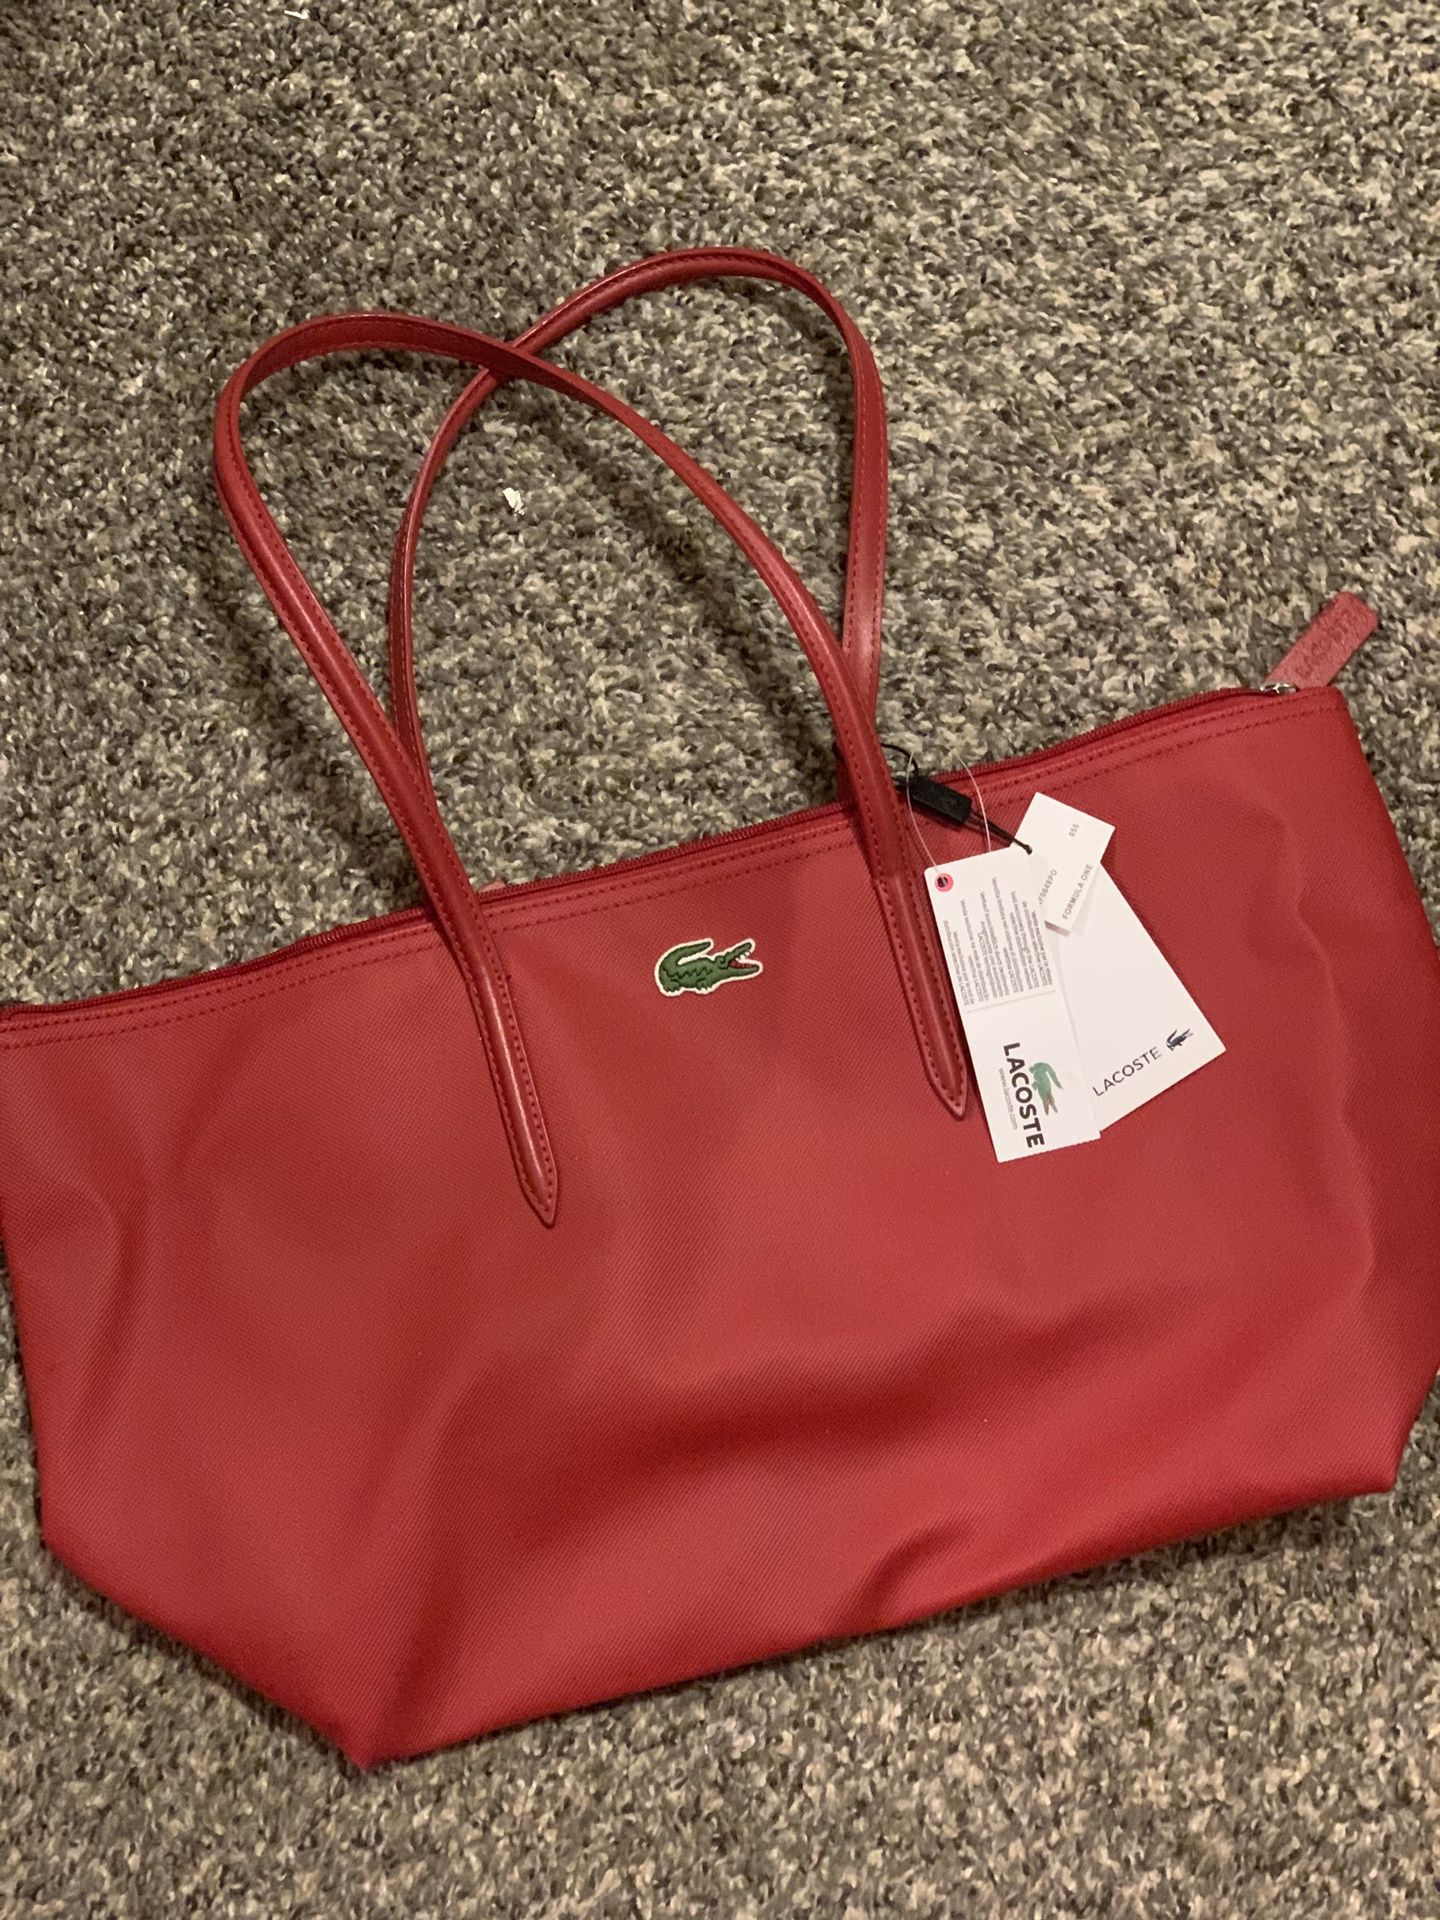 Brand New Lacoste Red Zip Tote Bag